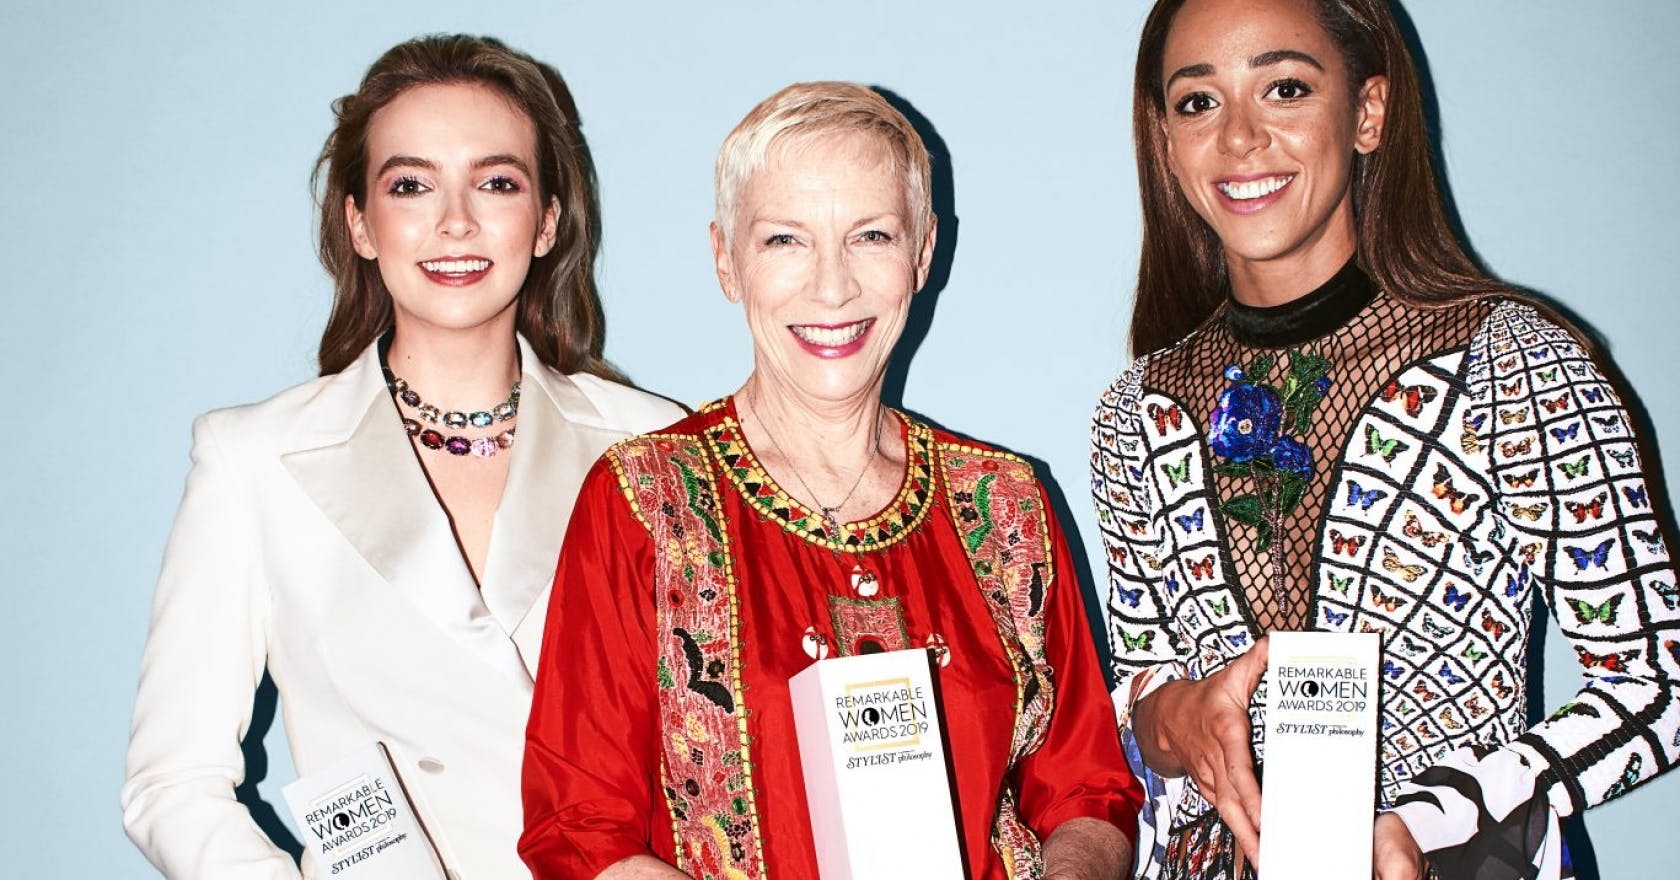 Remarkable Women Awards 2020 List of categories and how to vote